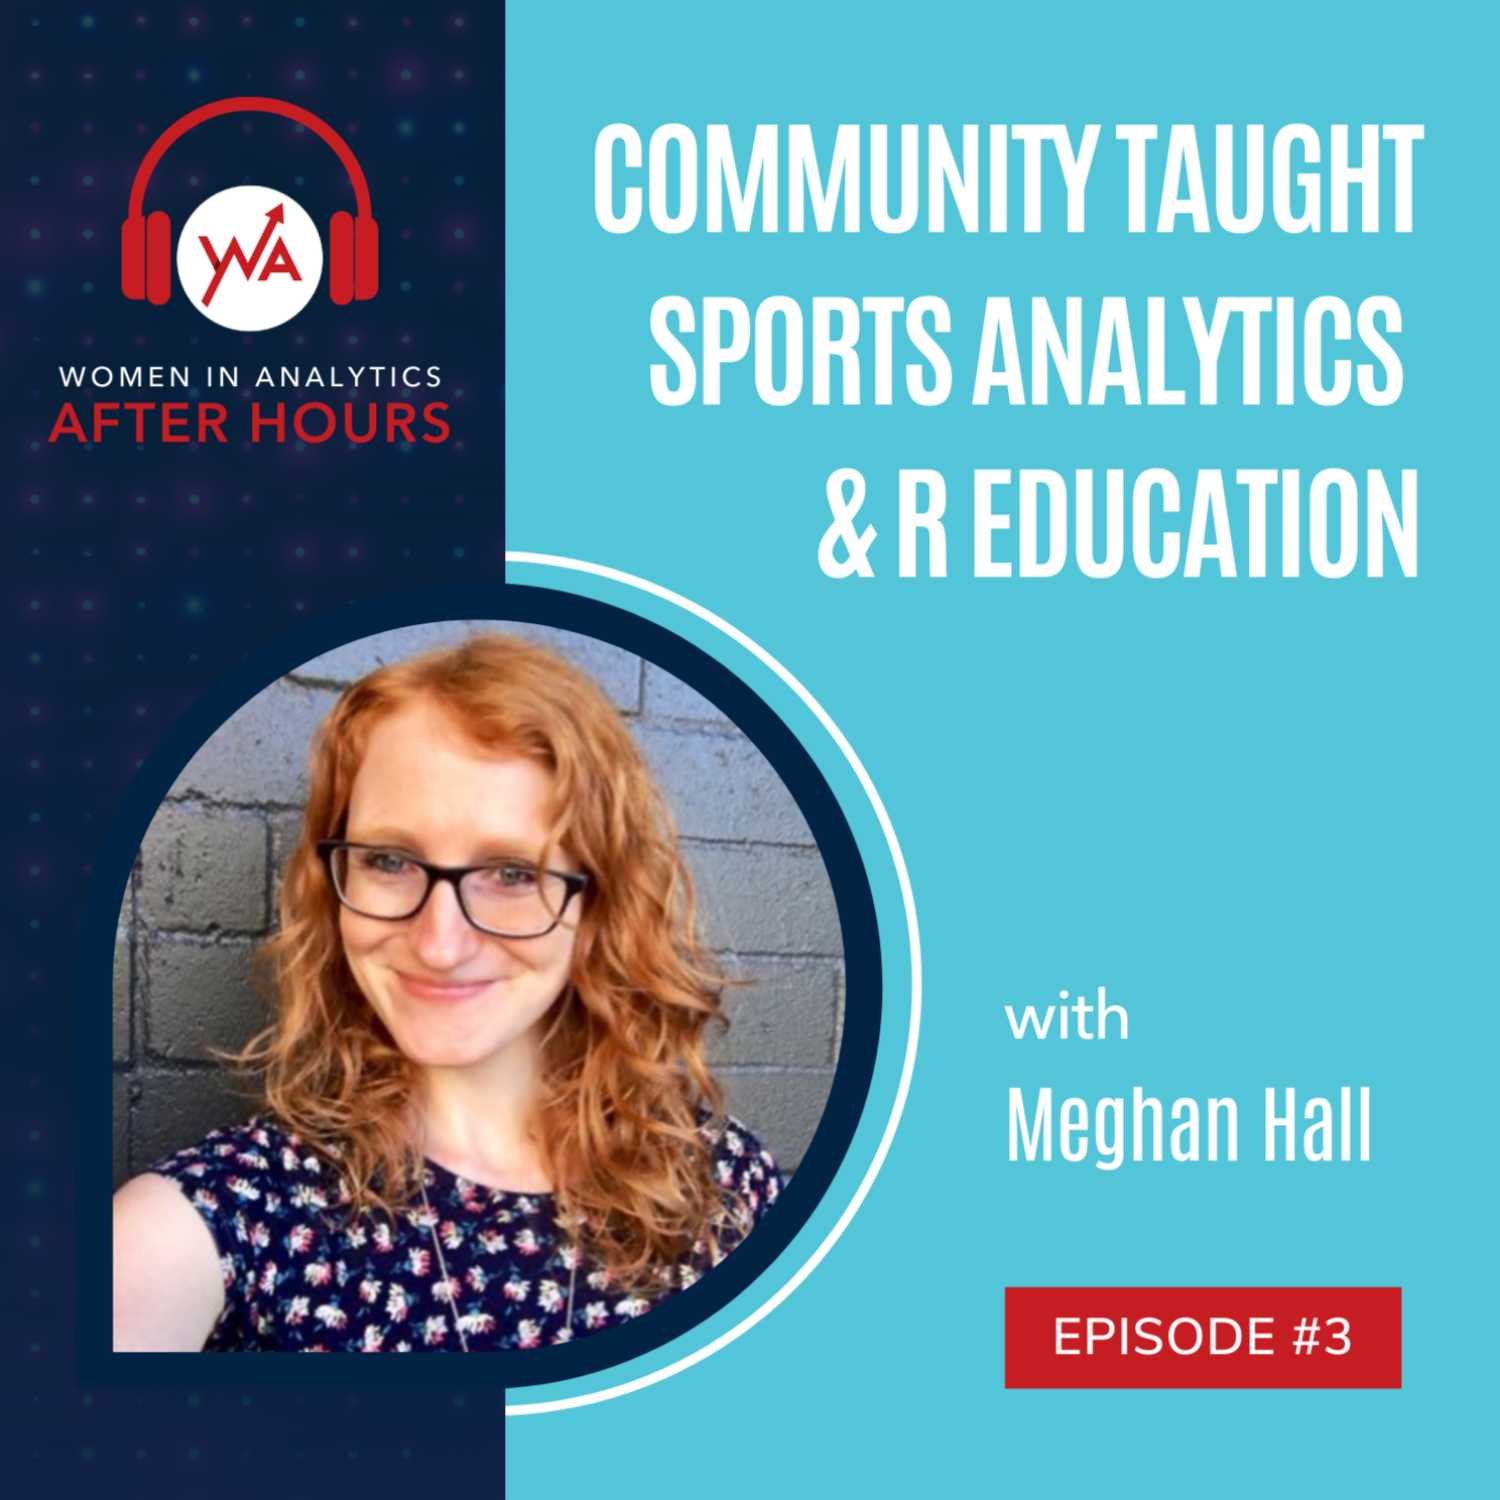 Episode 3 - Community-Taught Sports Analytics & R Education with Meghan Hall